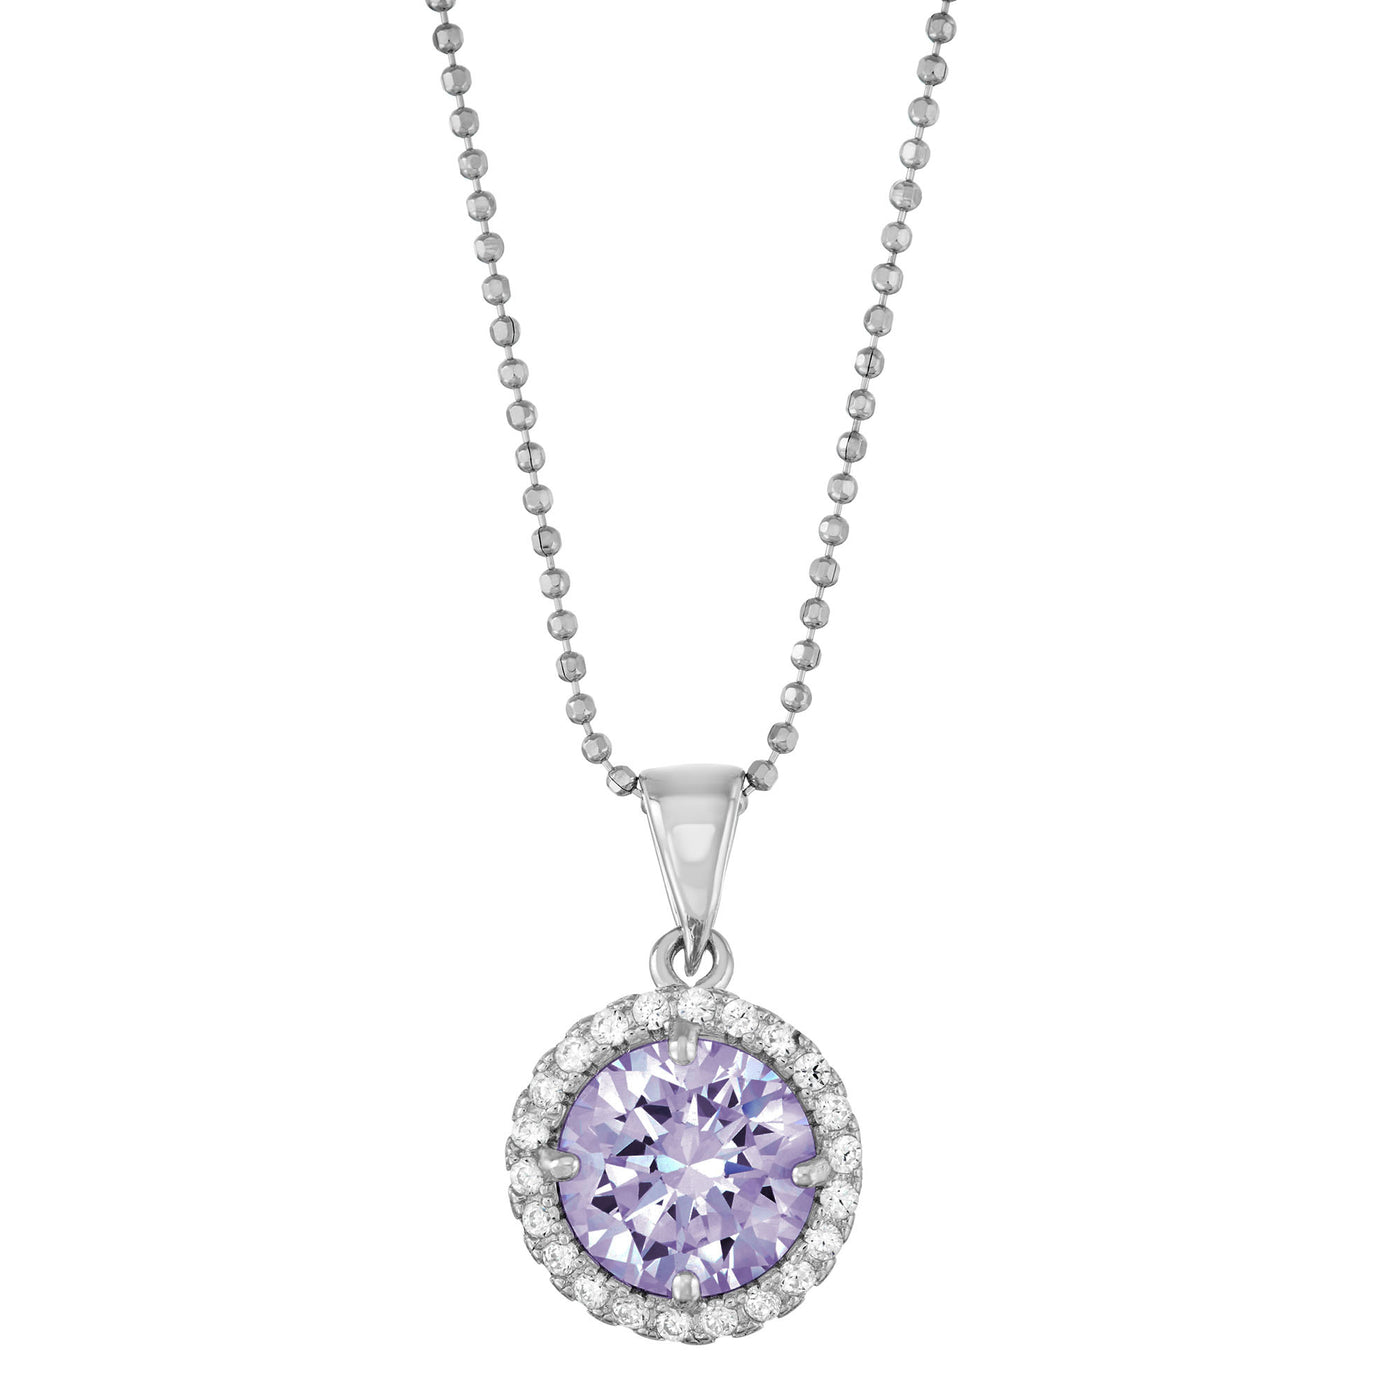 Rebecca Sloane Silver Circle with Faceted Lavender CZ Pendant